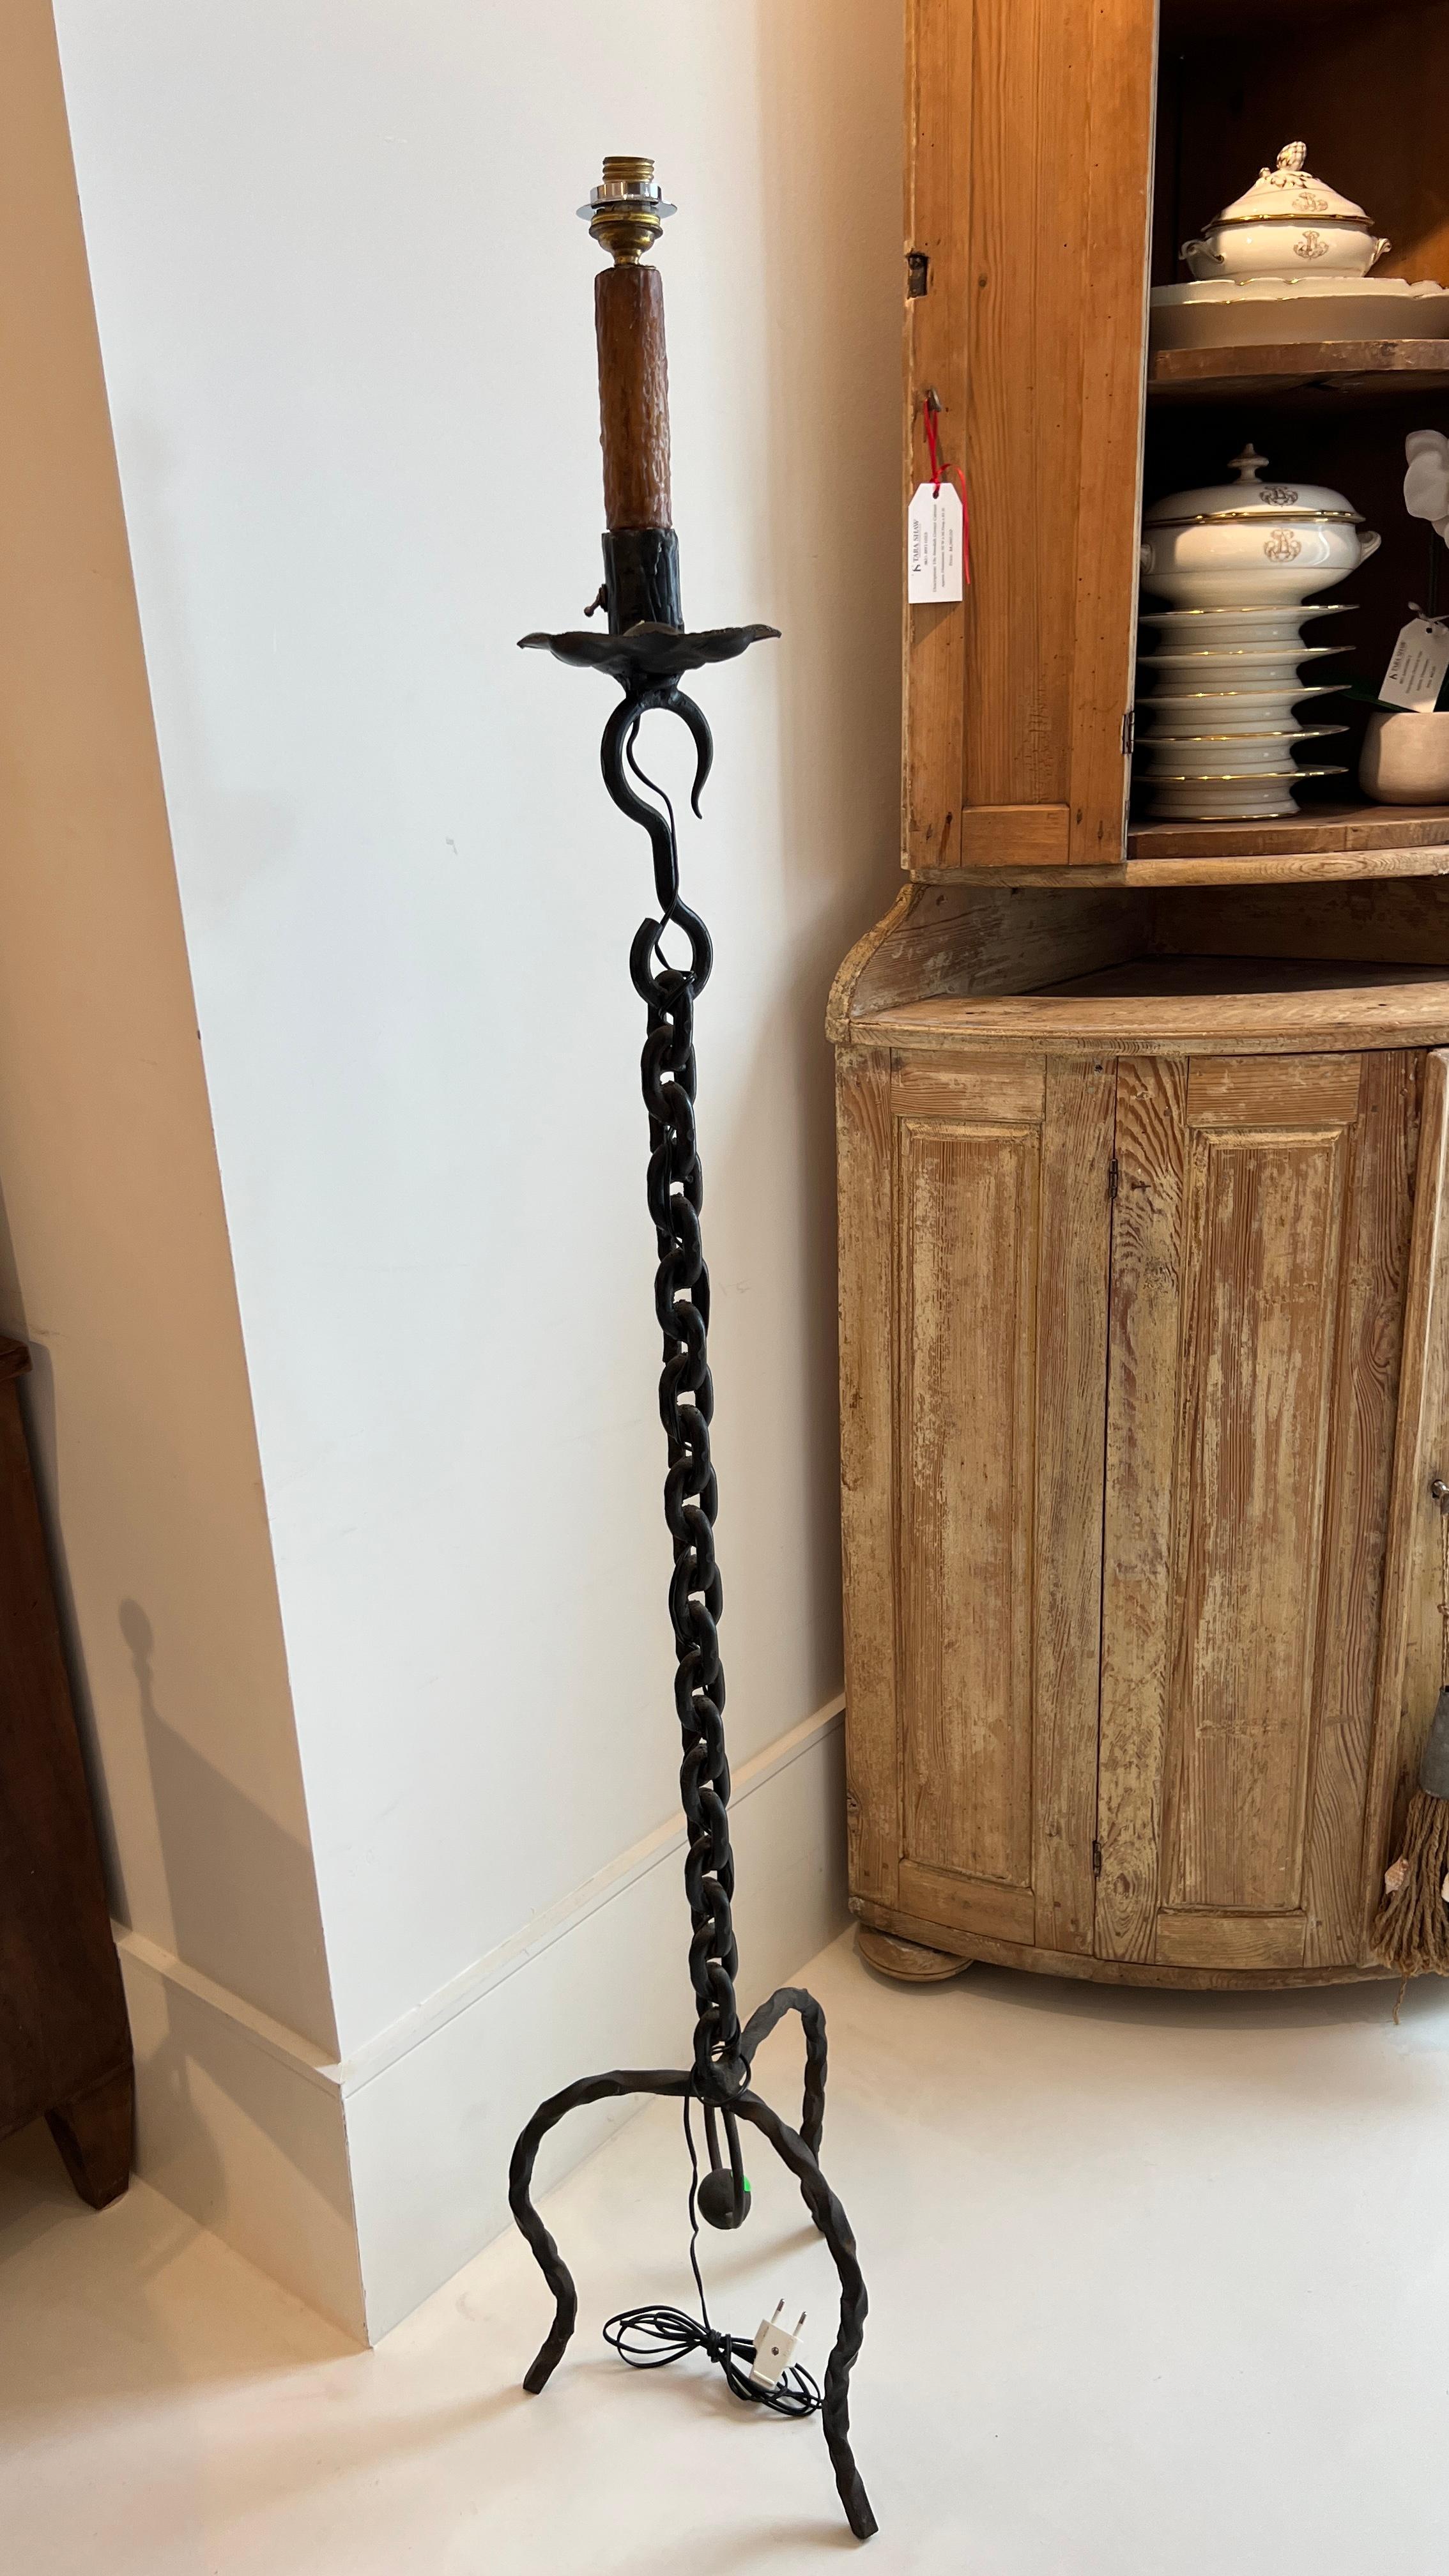 Black vintage wrought iron chain link floor lamp with shade. Industrial chic addition to a room.

Has been wired for US but not UL Listed